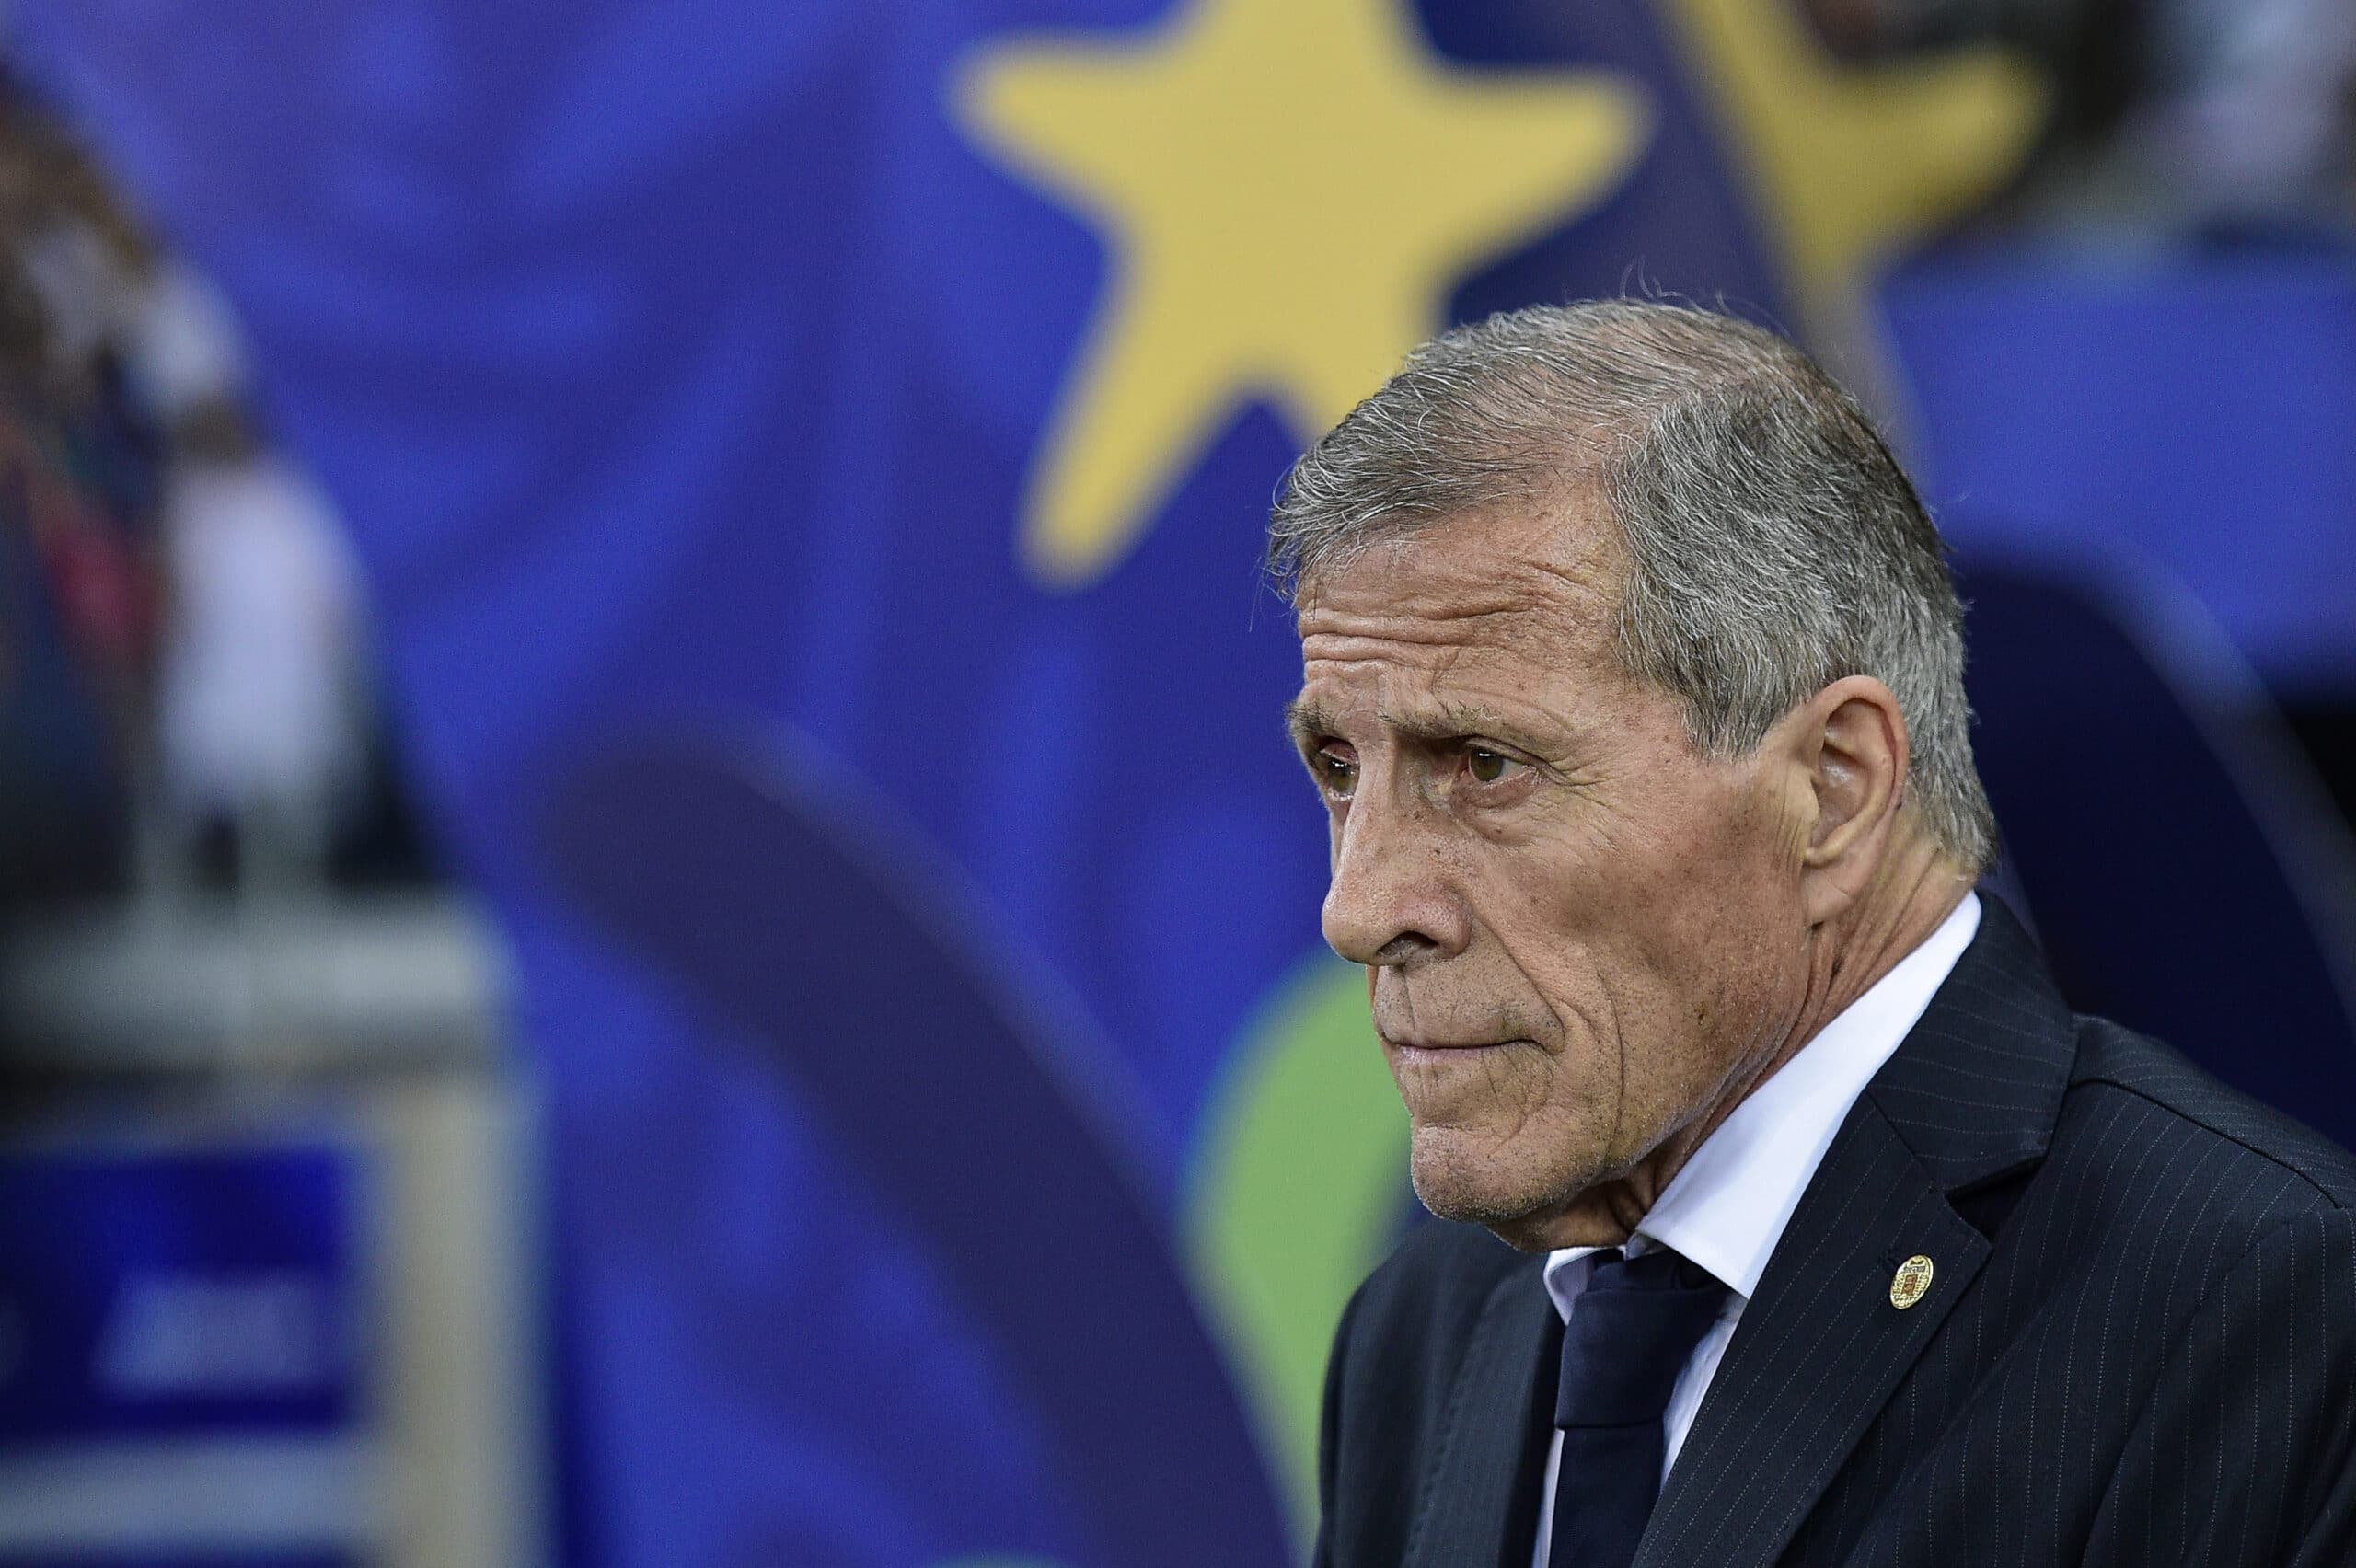 BELO HORIZONTE, BRAZIL - JUNE 16: Oscar Tabarez coach of Uruguay looks on during the Copa America Brazil 2019 Group C match between Uruguay and Ecuador at Mineirao Stadium on June 16, 2019 in Belo Horizonte, Brazil. (Photo by Juliana Flister/Getty Images)